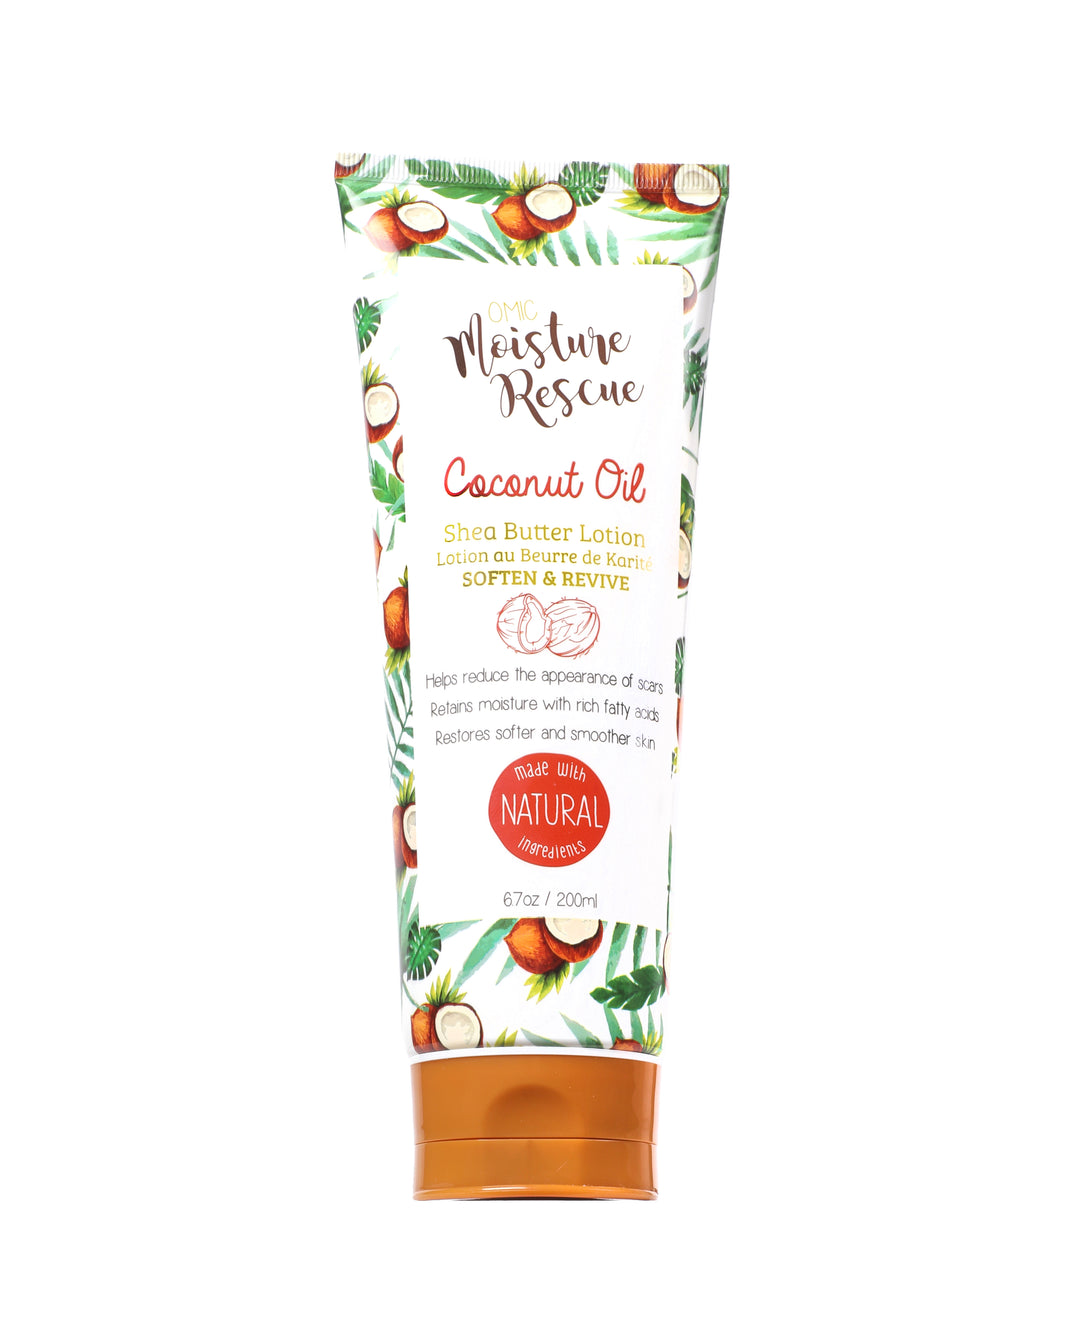 Moisture Rescue Shea Butter Lotion Tube  with Coconut Oil Mitchell Brands - Mitchell Brands - Skin Lightening, Skin Brightening, Fade Dark Spots, Shea Butter, Hair Growth Products